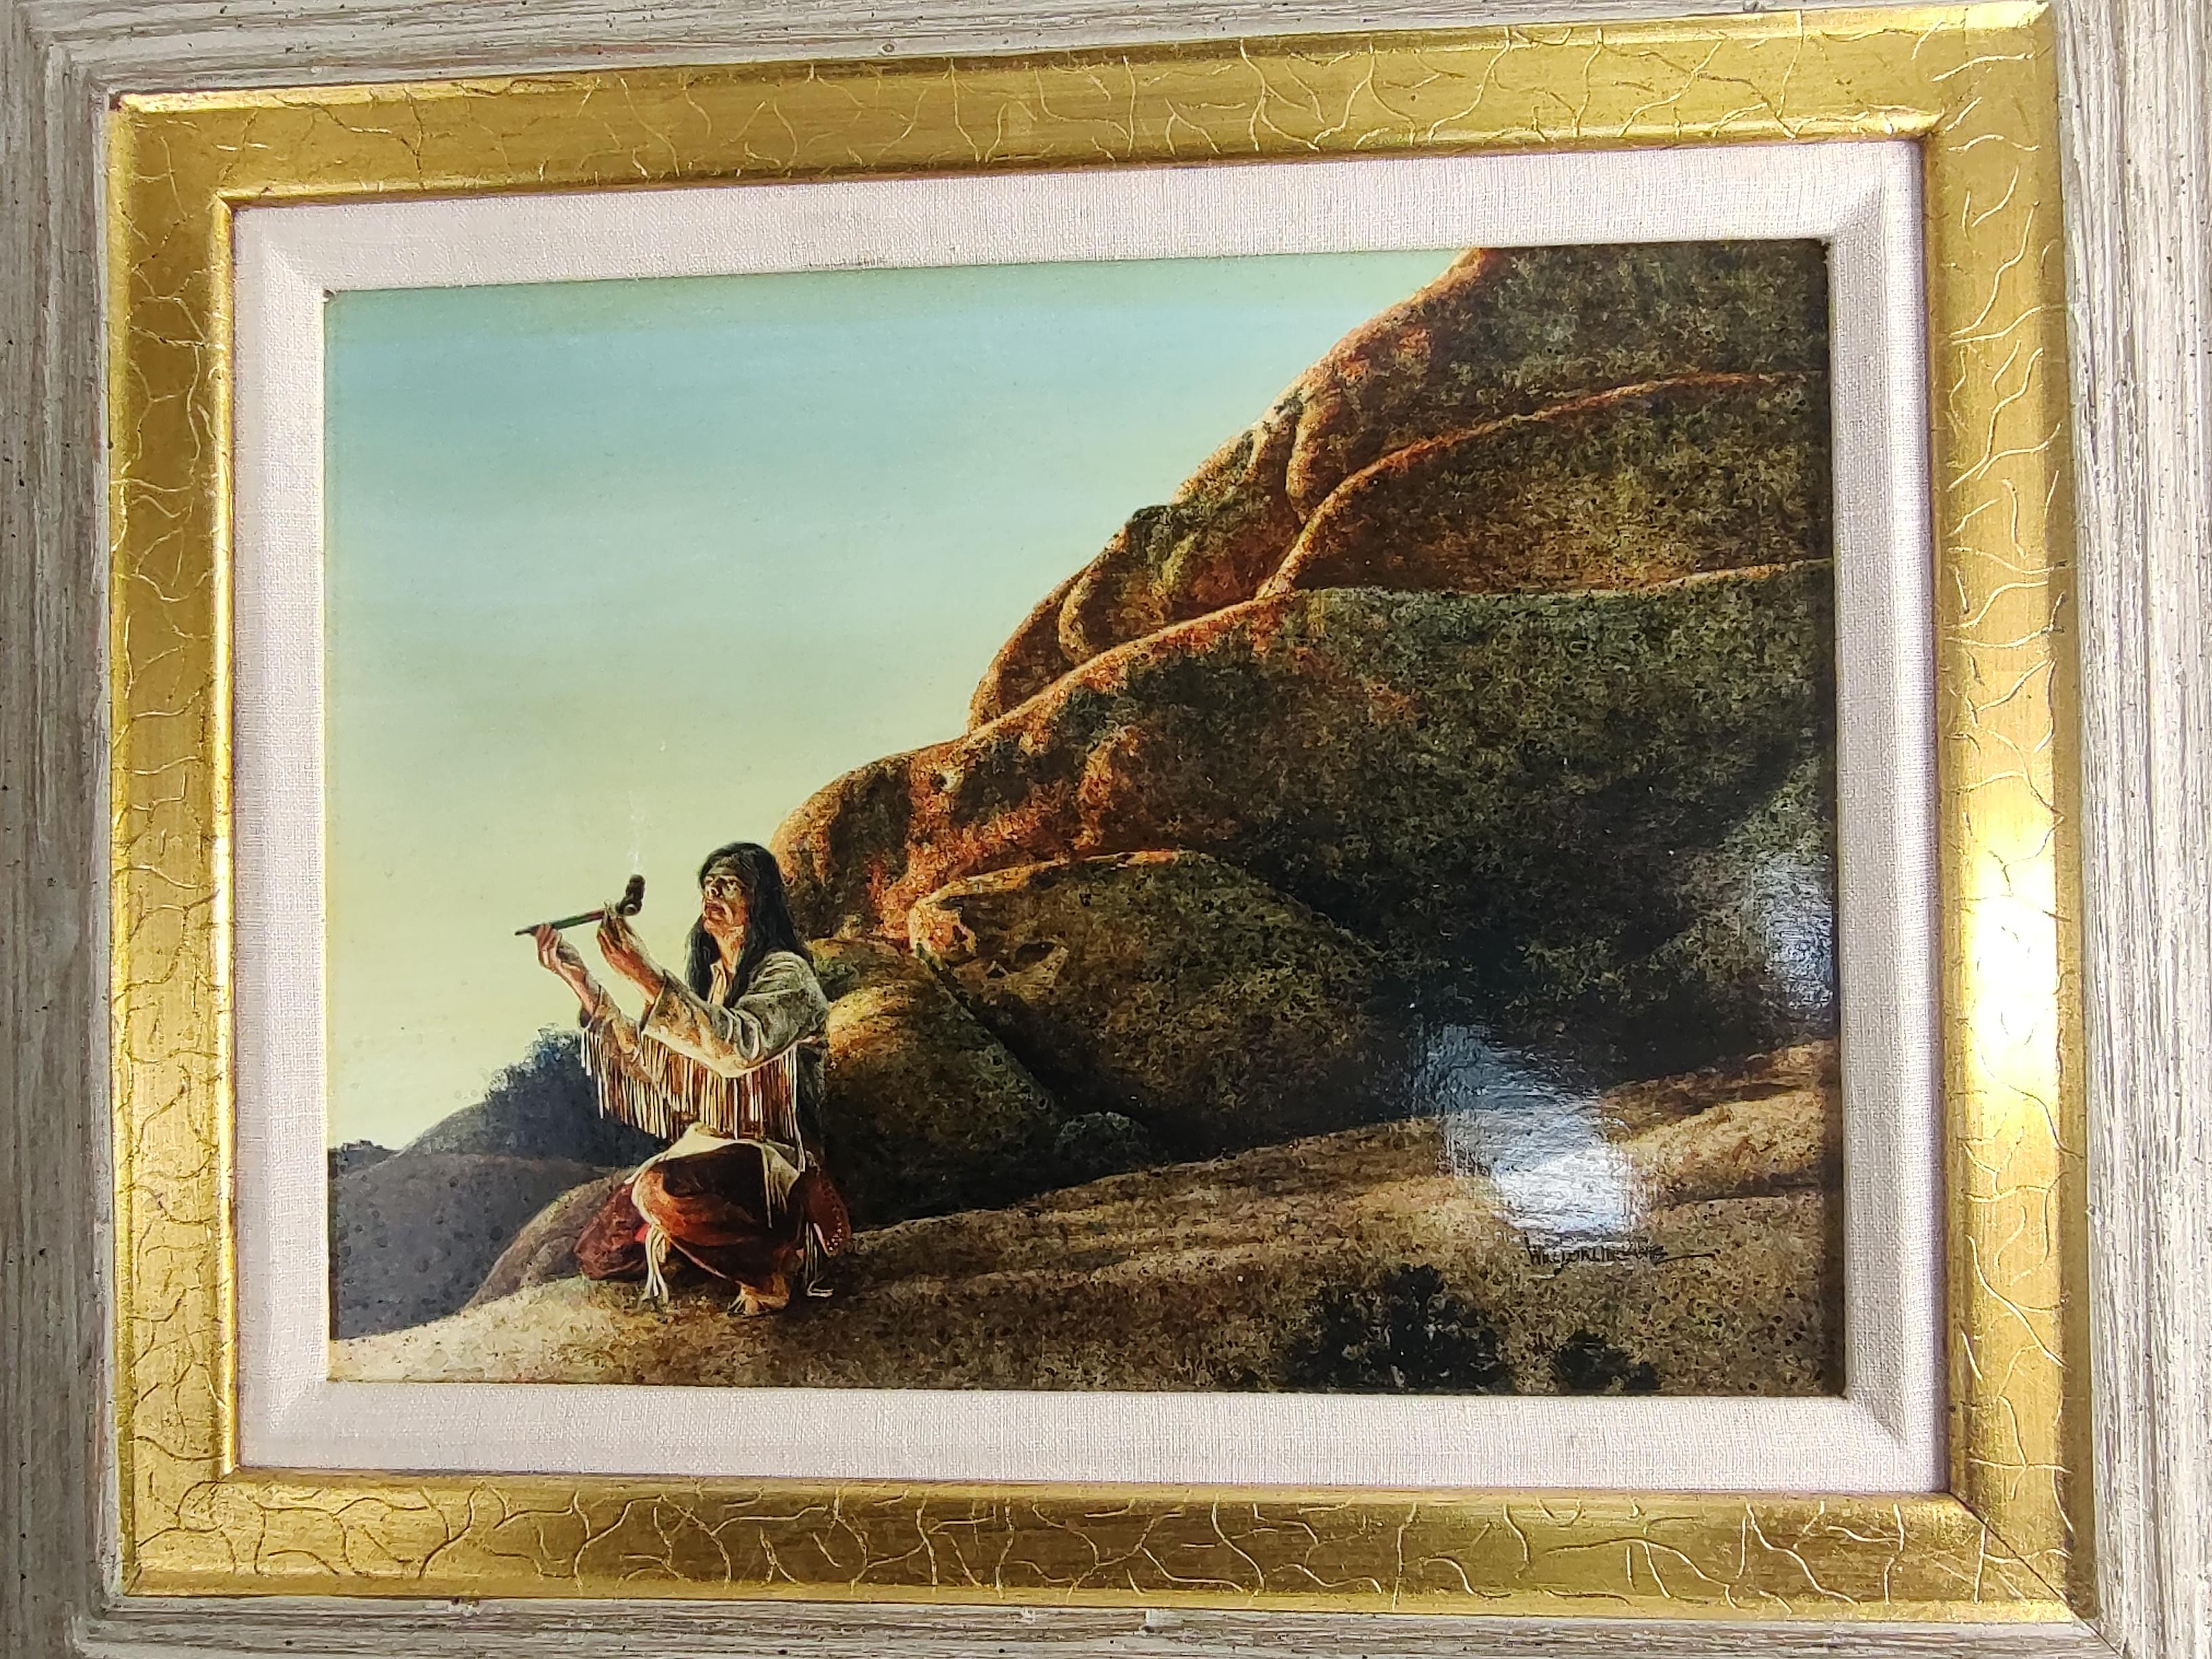 Beautiful Oil on Canvas painting of a southwestern scene showing a native American Indian involved in a peace pipe ceremony. Great technique by William Burlingame, fabulous color. Beautifully framed and in excellent vintage condition. 